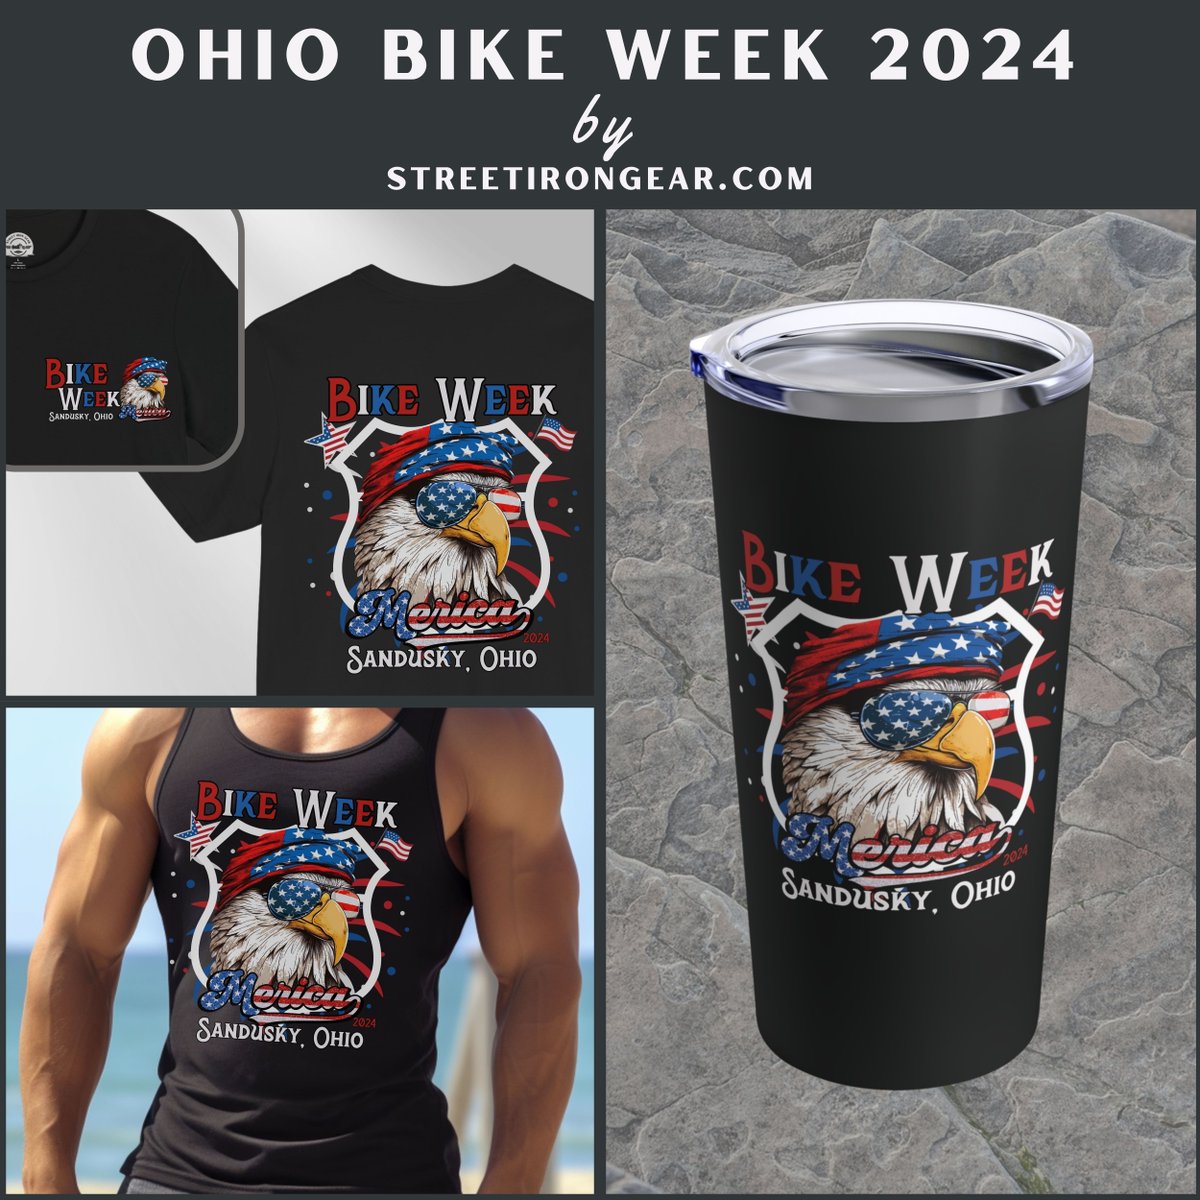 Ohio Bike Week 2024 Patriotic Eagle Collection - From cool tees to cozy tanks and travel mugs, we've got your back!  #StreetIronGear #OhioBikeWeek2024 #PatrioticEagle #MotorcycleLife #BikerGear #RideInStyle #FreedomOnWheels 

Get it!
buff.ly/4aKTZzc